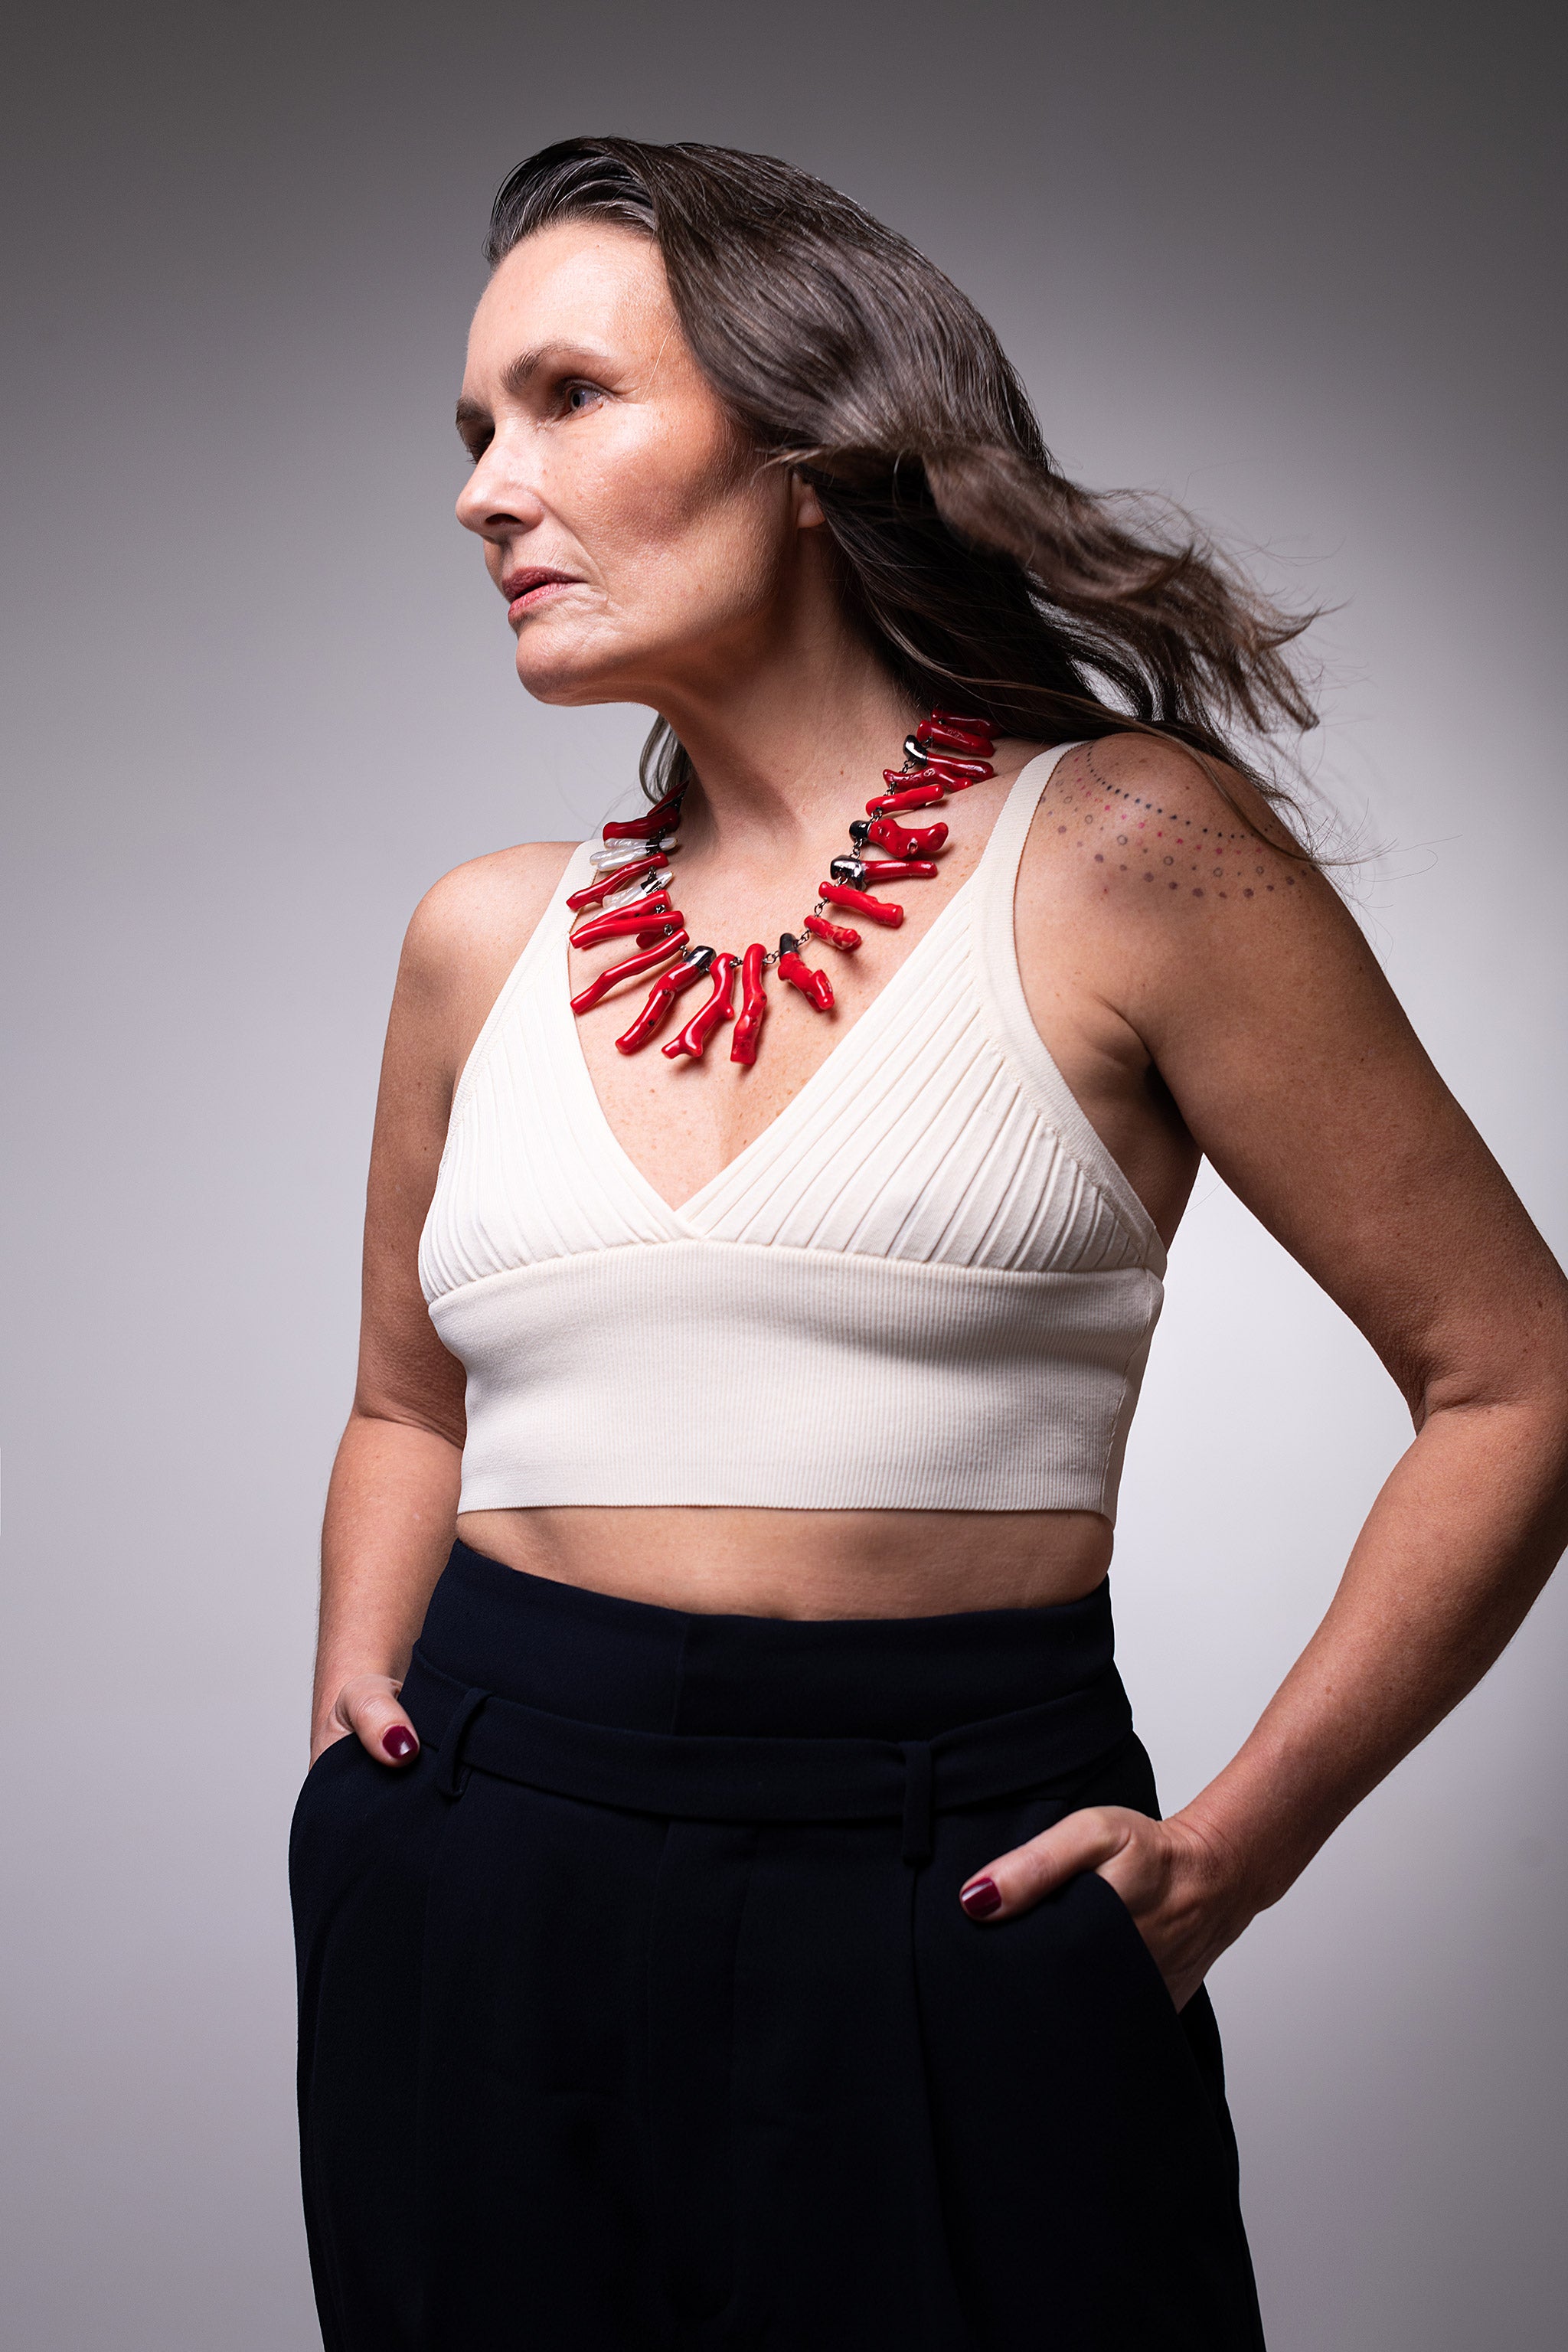 House of Sol - HoS - Unique High-end Fine Jewelry for unapologetic women. 